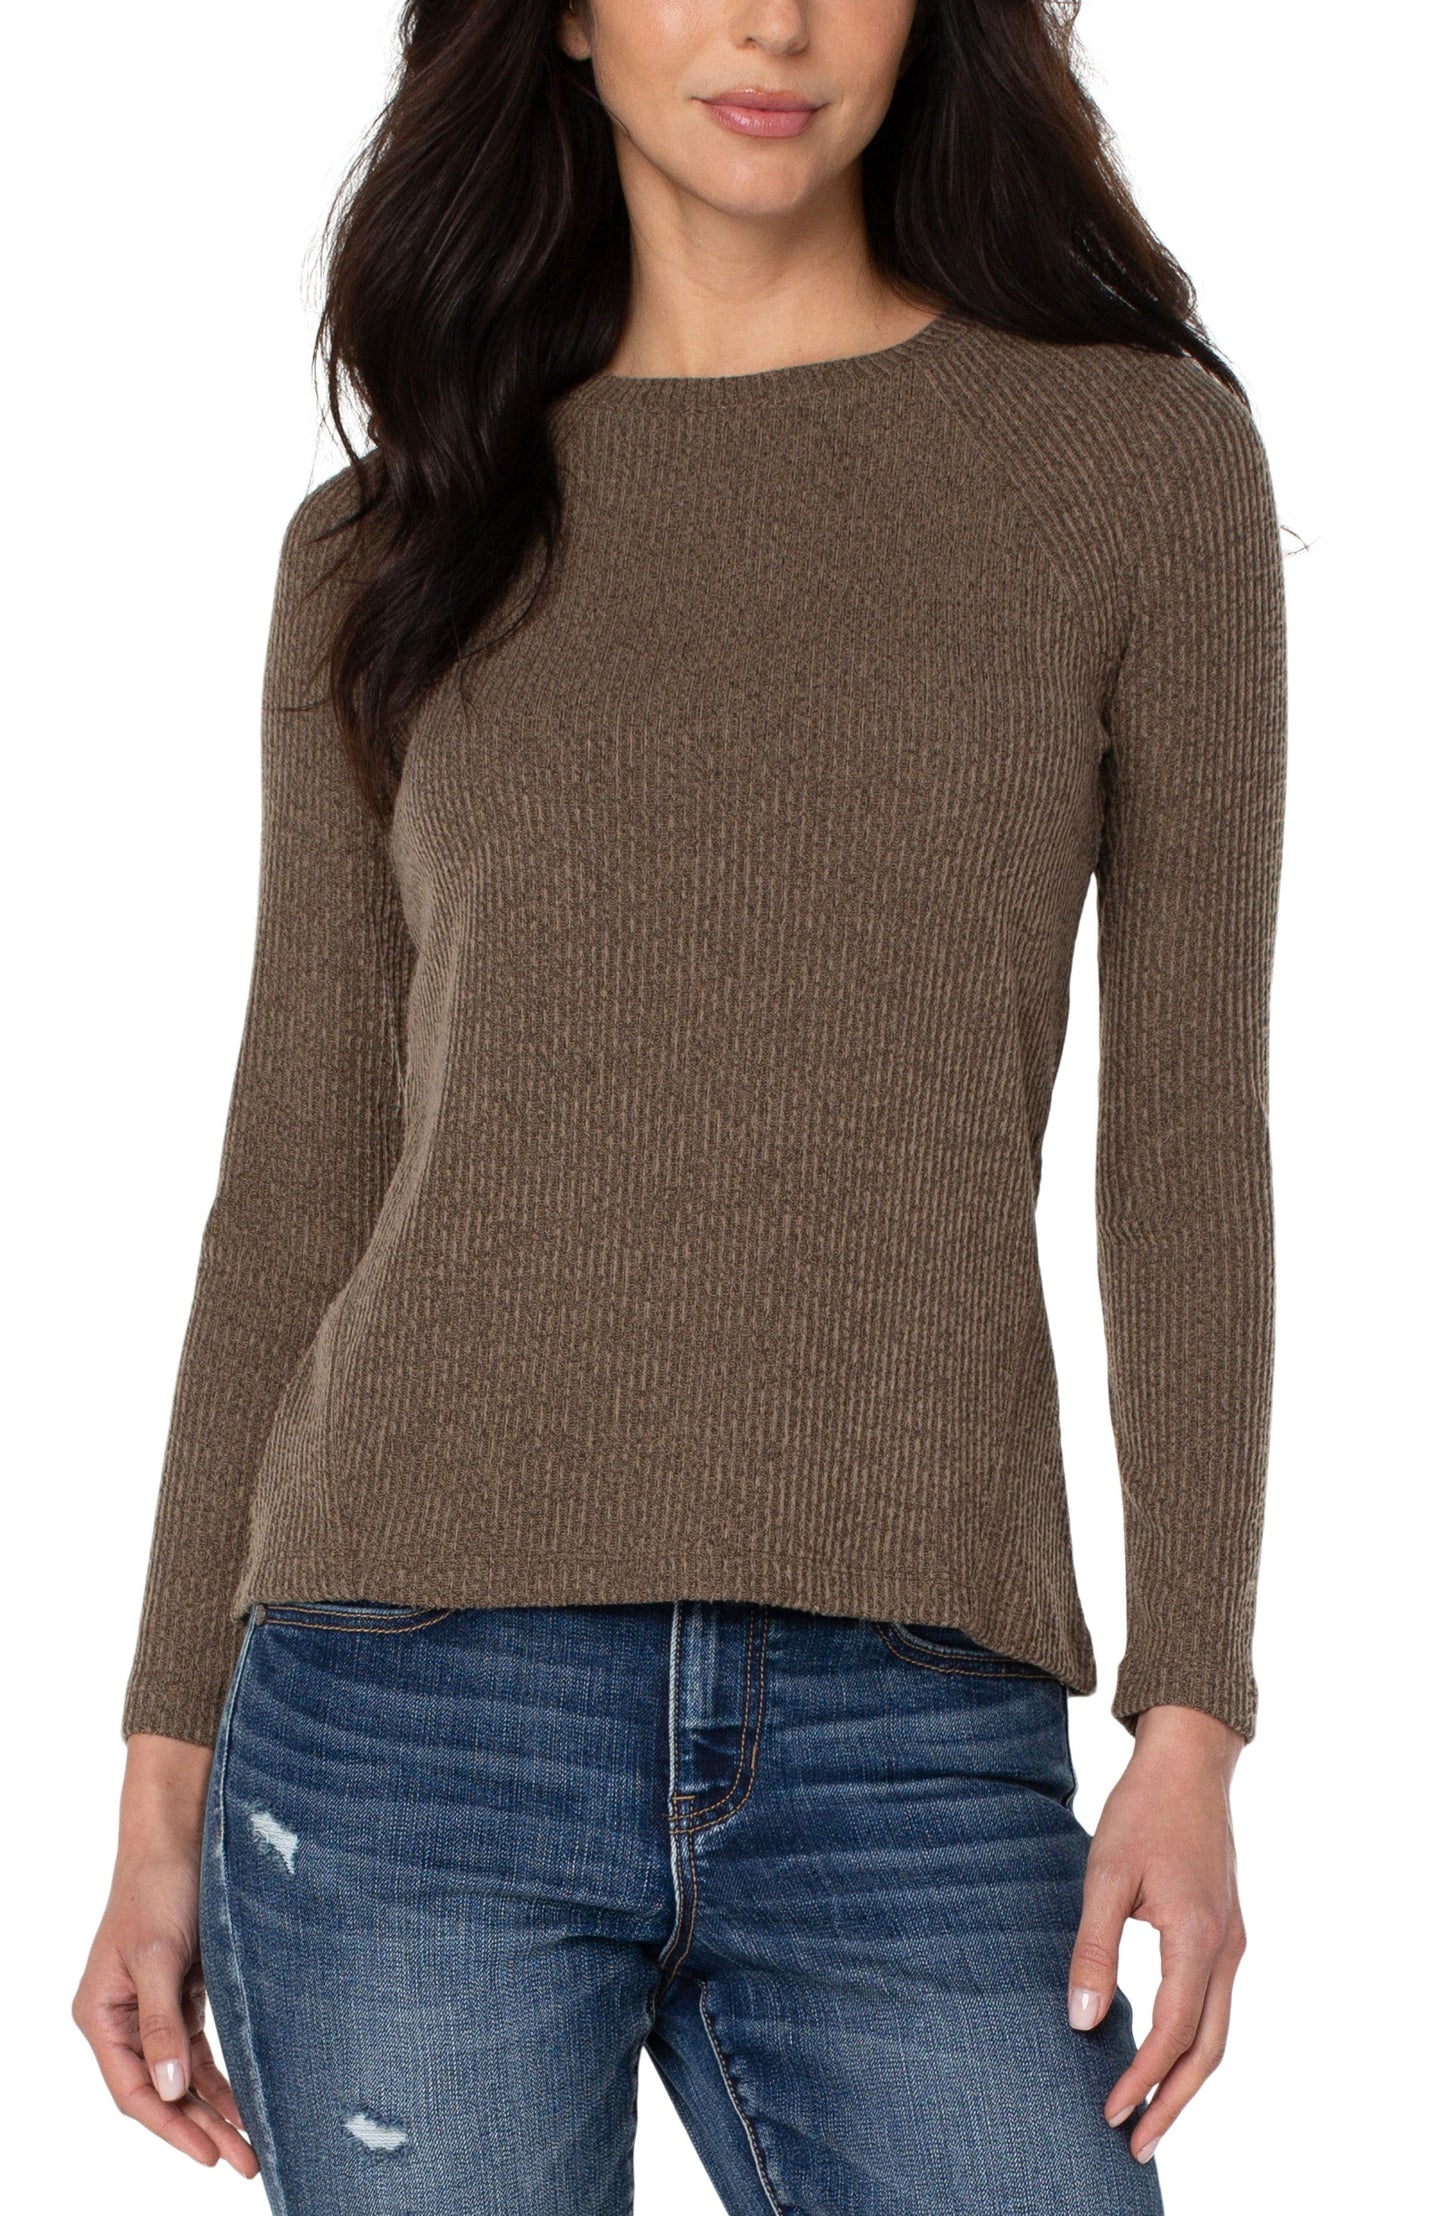 Liverpool Texture Block Crew Neck Long Sleeve Knit Top (Earth Brown)